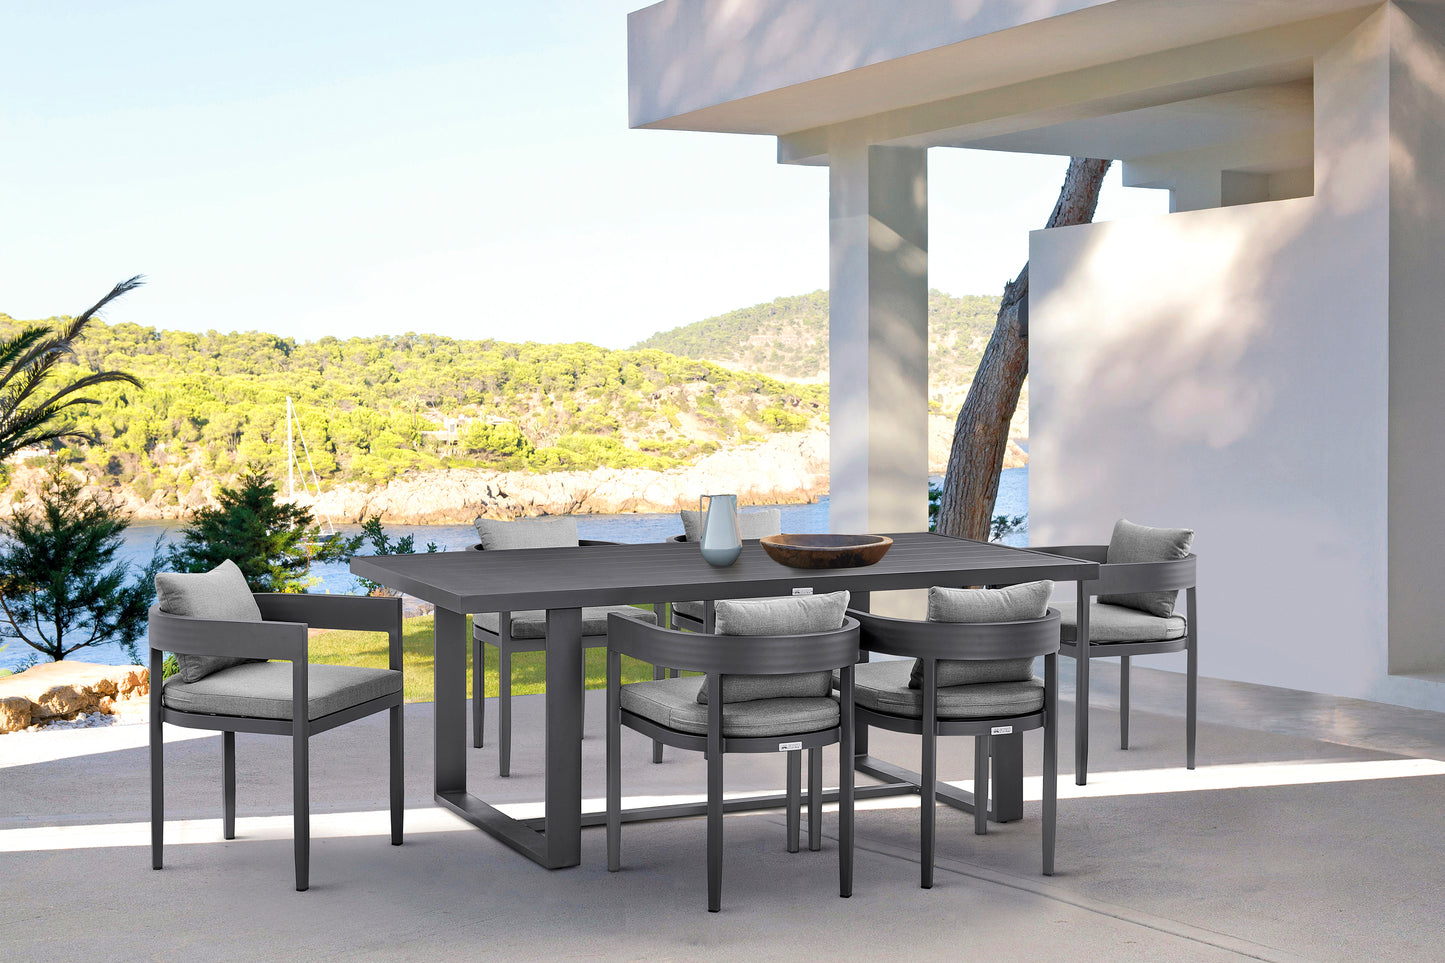 Menorca Outdoor Patio 7-Piece Dining Table Set in Aluminum with Gray Cushions